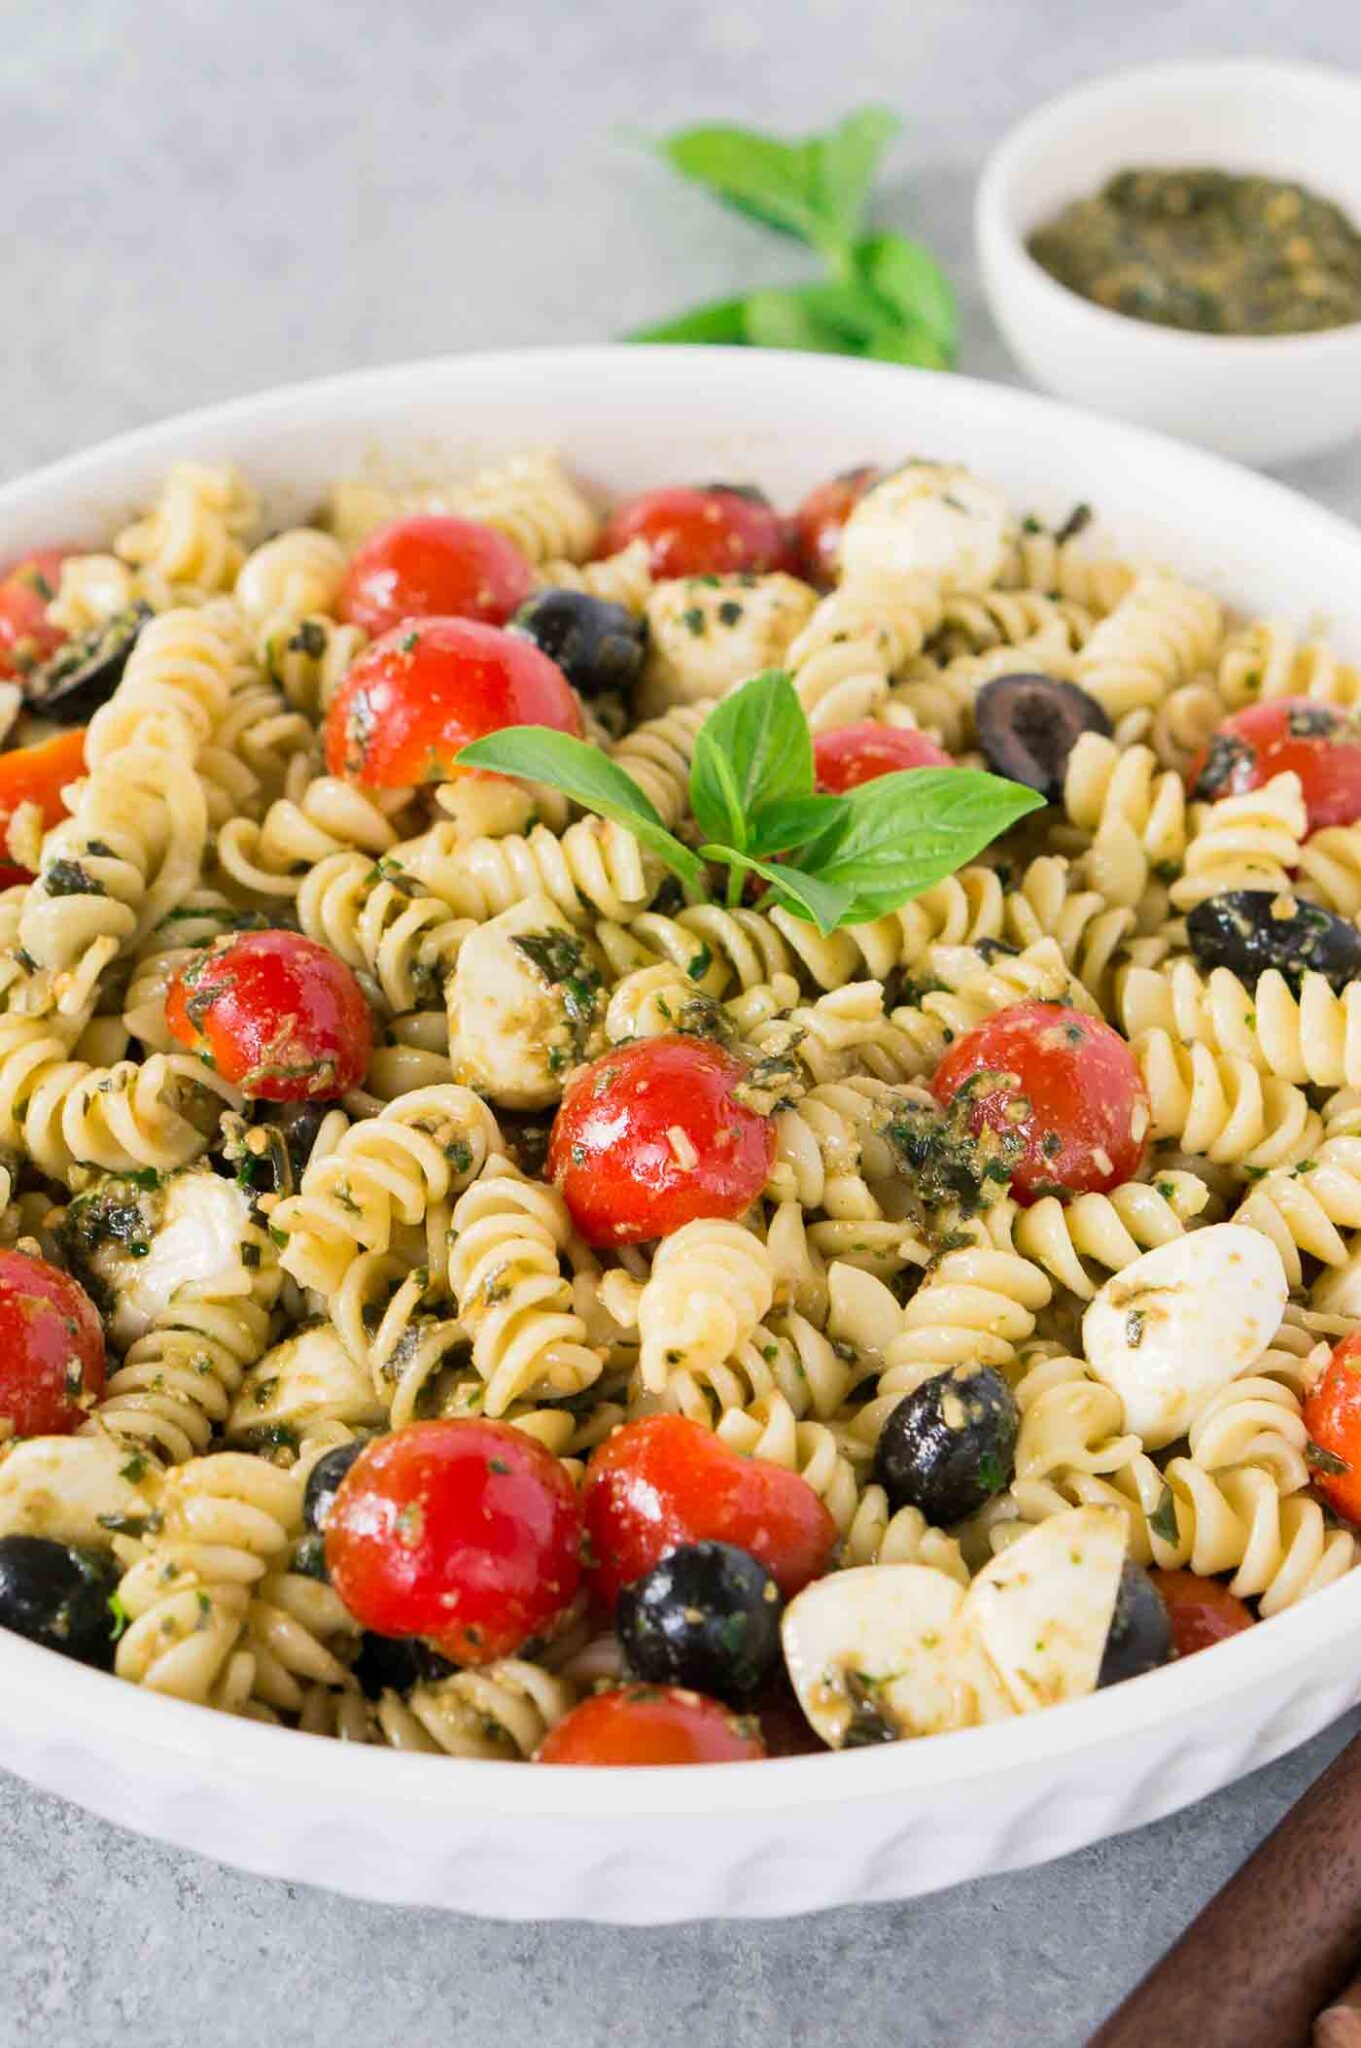 close up image of pesto pasta salad with tomatoes and olives and mozzarella balls